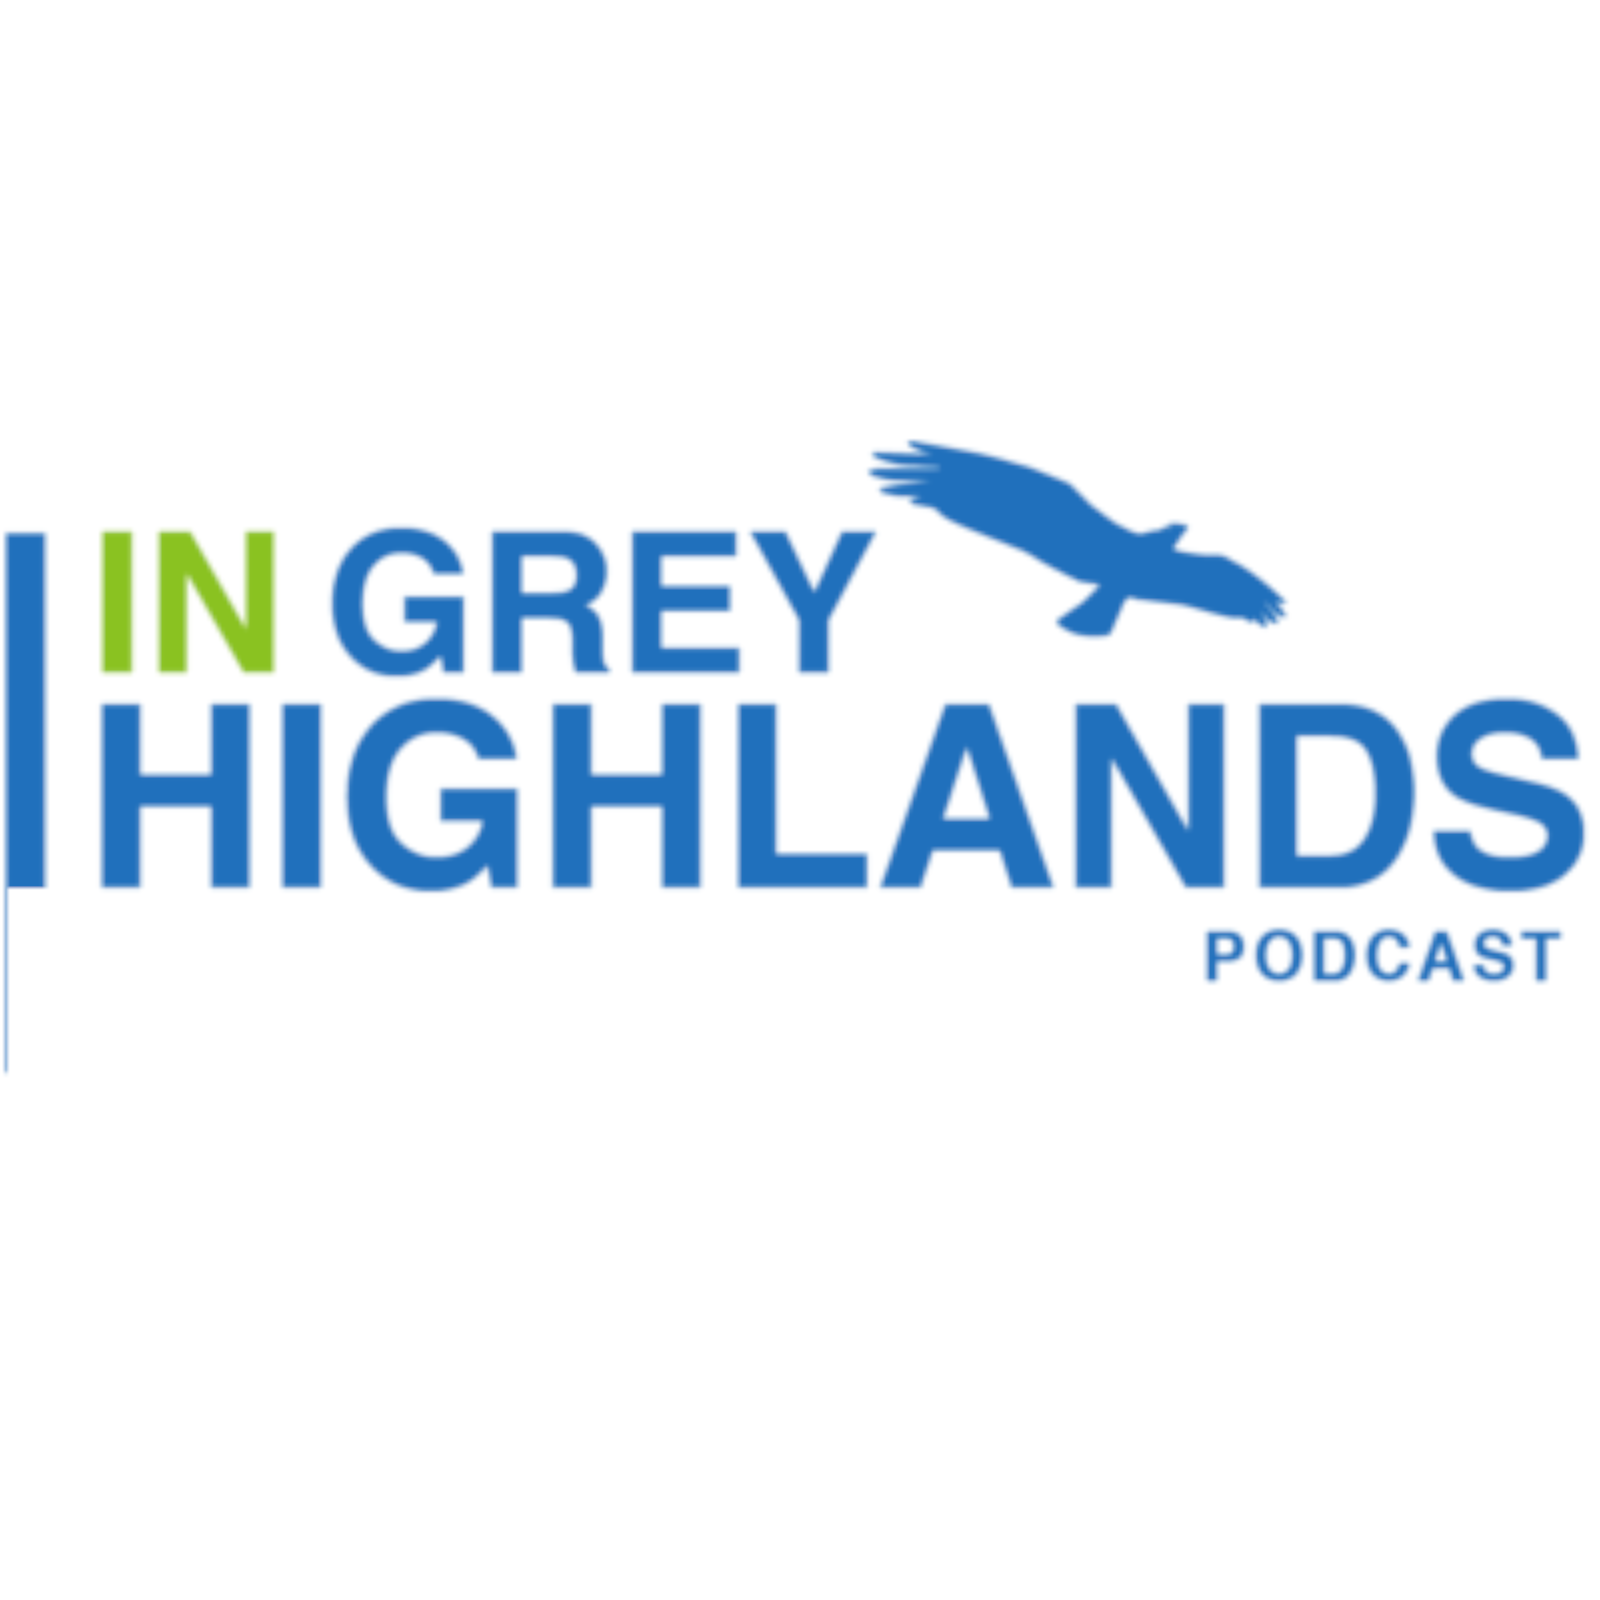 Artwork for podcast In Grey Highlands This Week